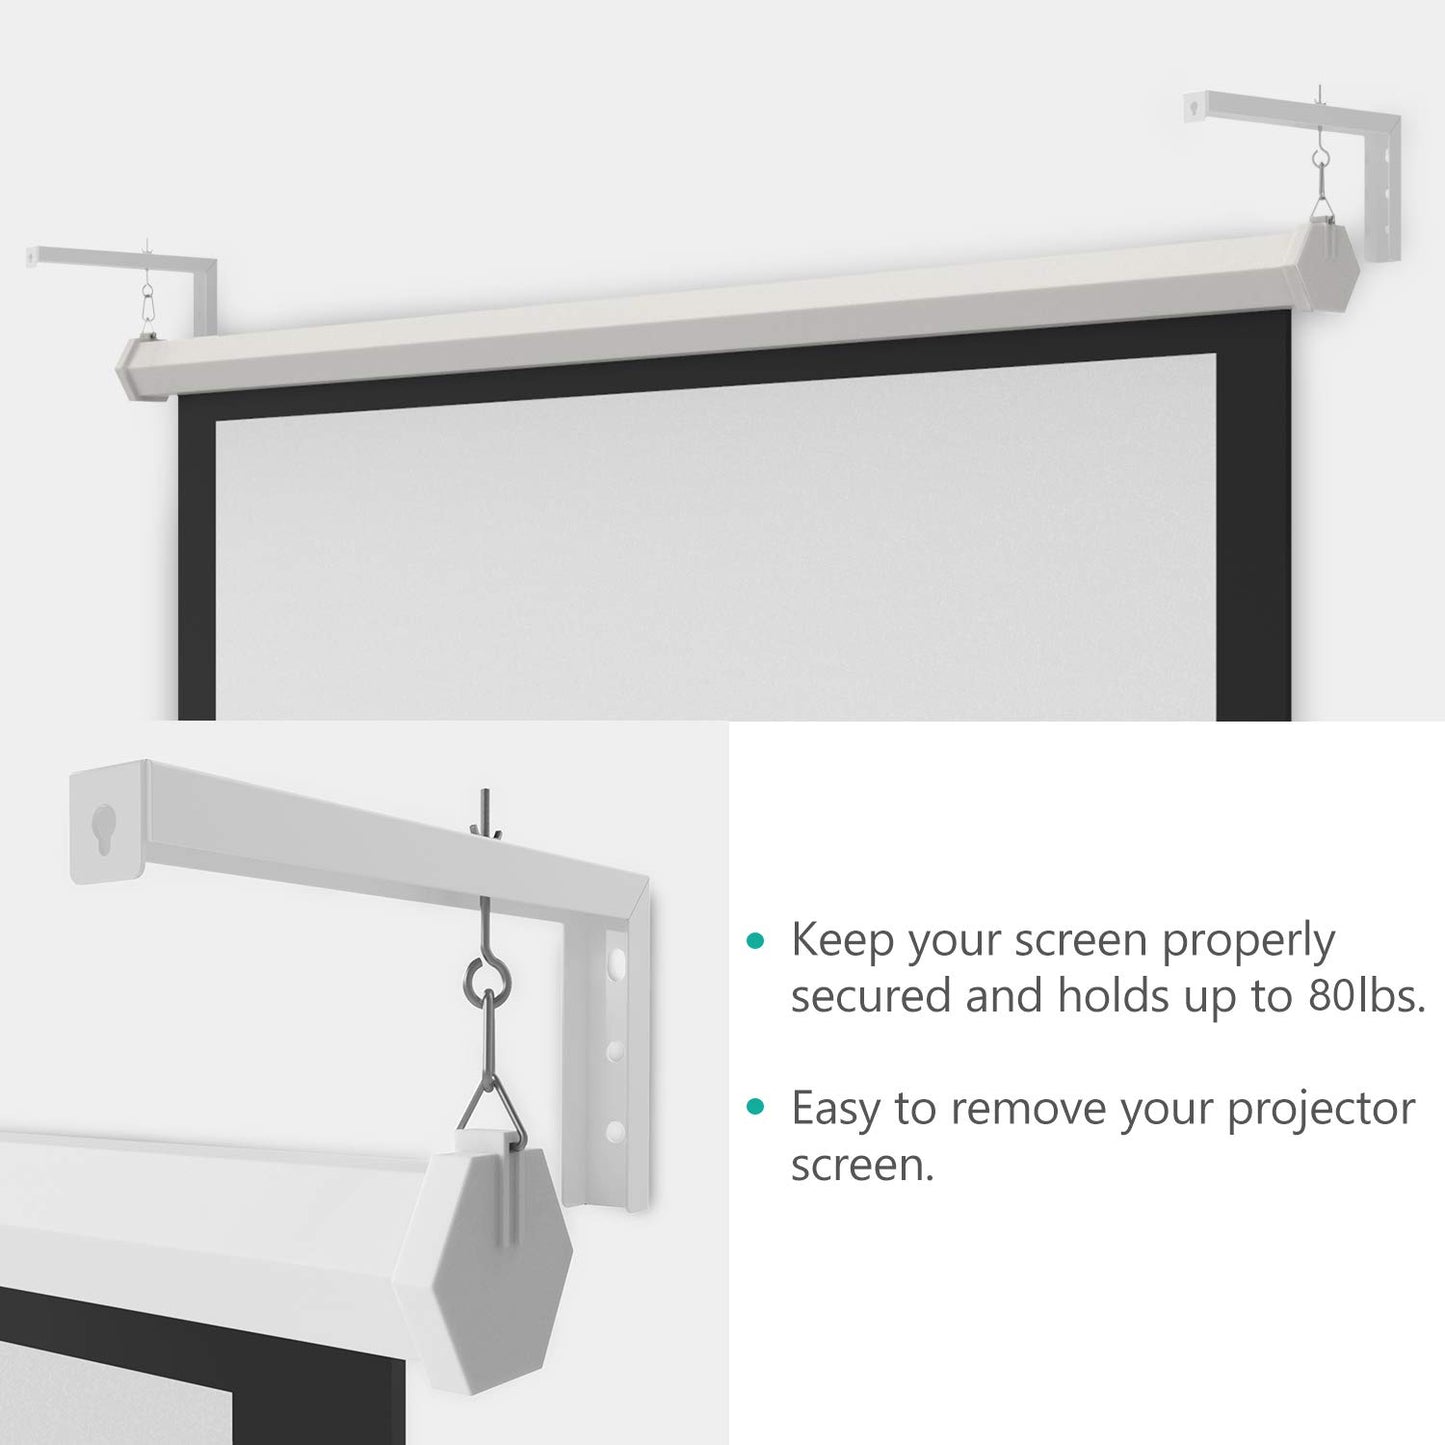 WALI Universal Projector Screen Ceiling Mount, Wall Hanging Mount L-Brackets, 12 inch Adjustable Extension with Hook Kit, Perfect Projector Screen Placement Hold up to 80 lbs (PSM001XL-B), Black